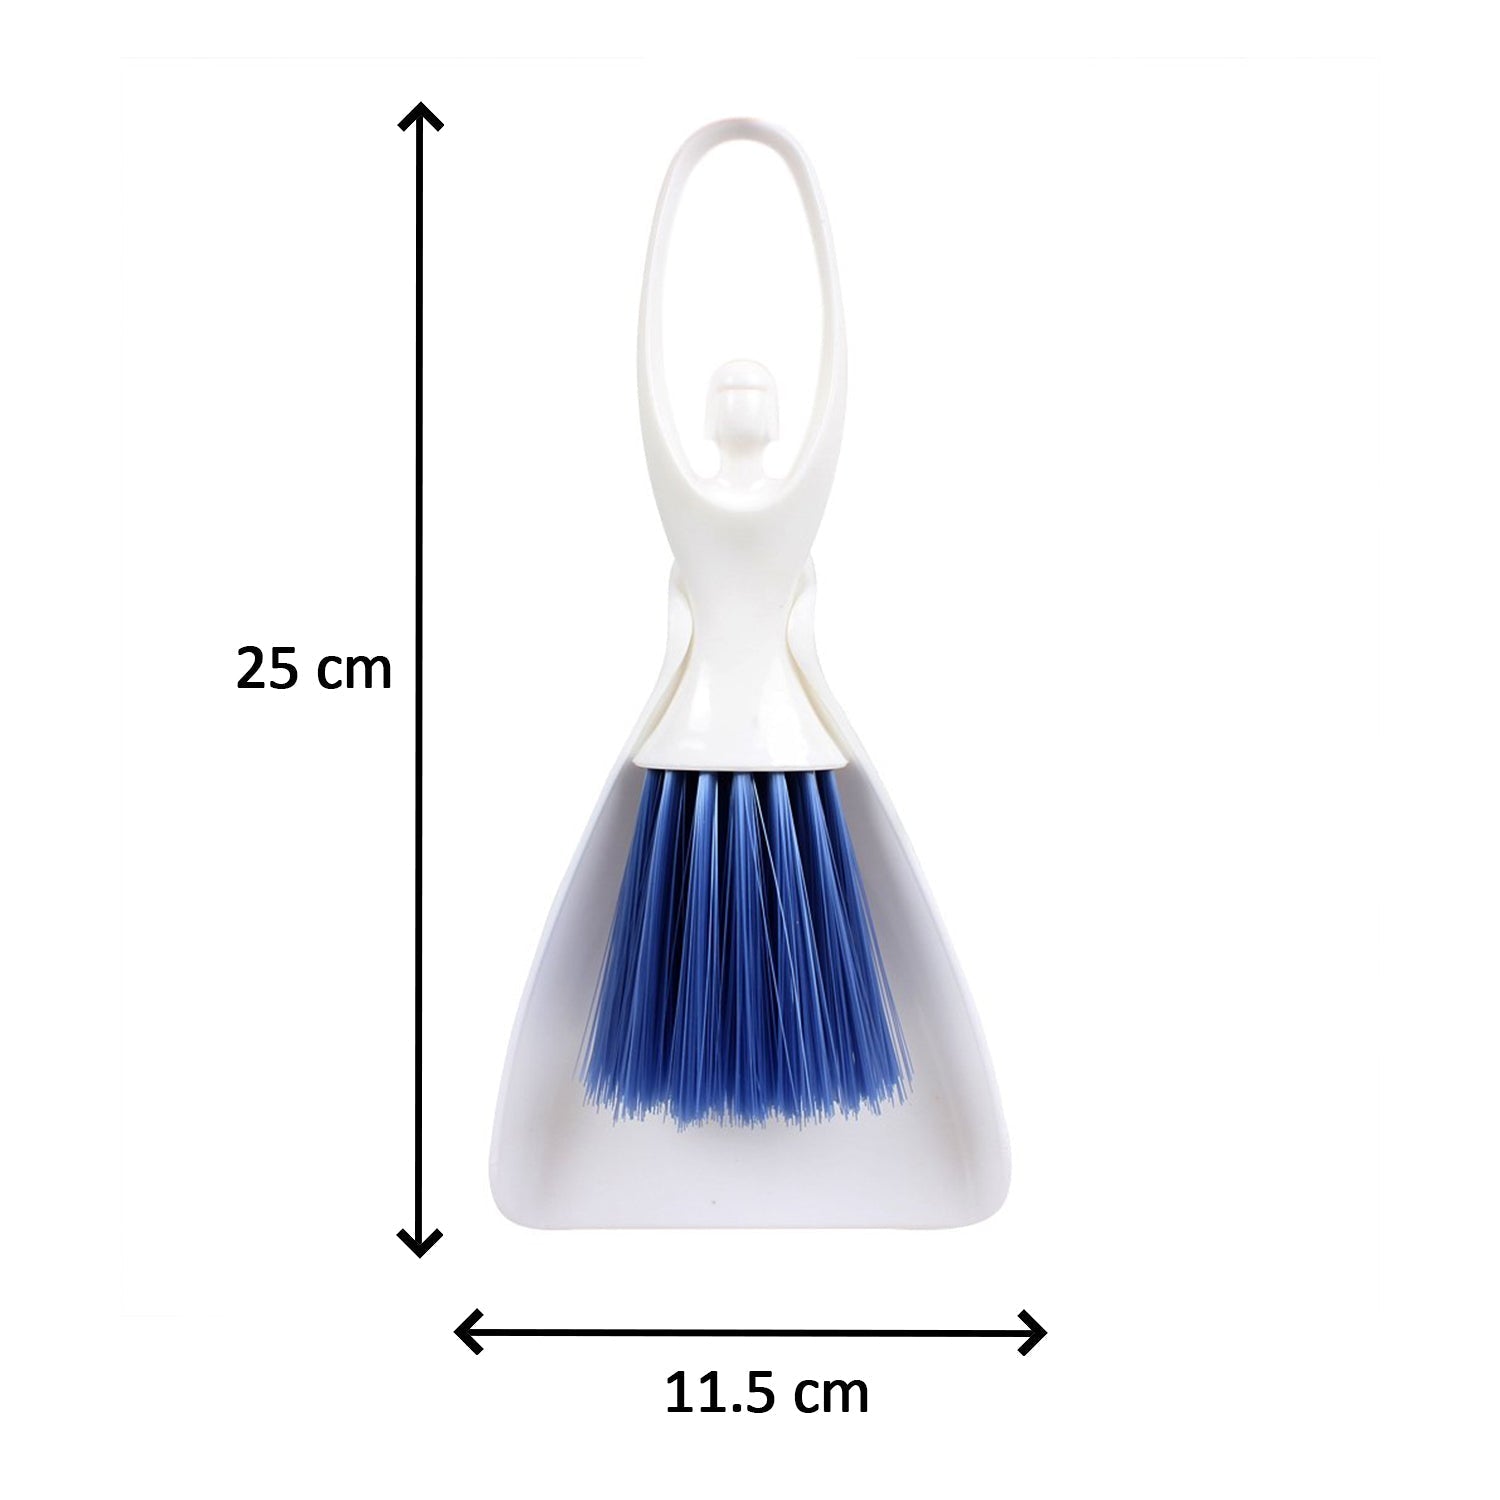 2614 Dustpan Set Used for Cleaning and removal of Dirt from floor surfaces.